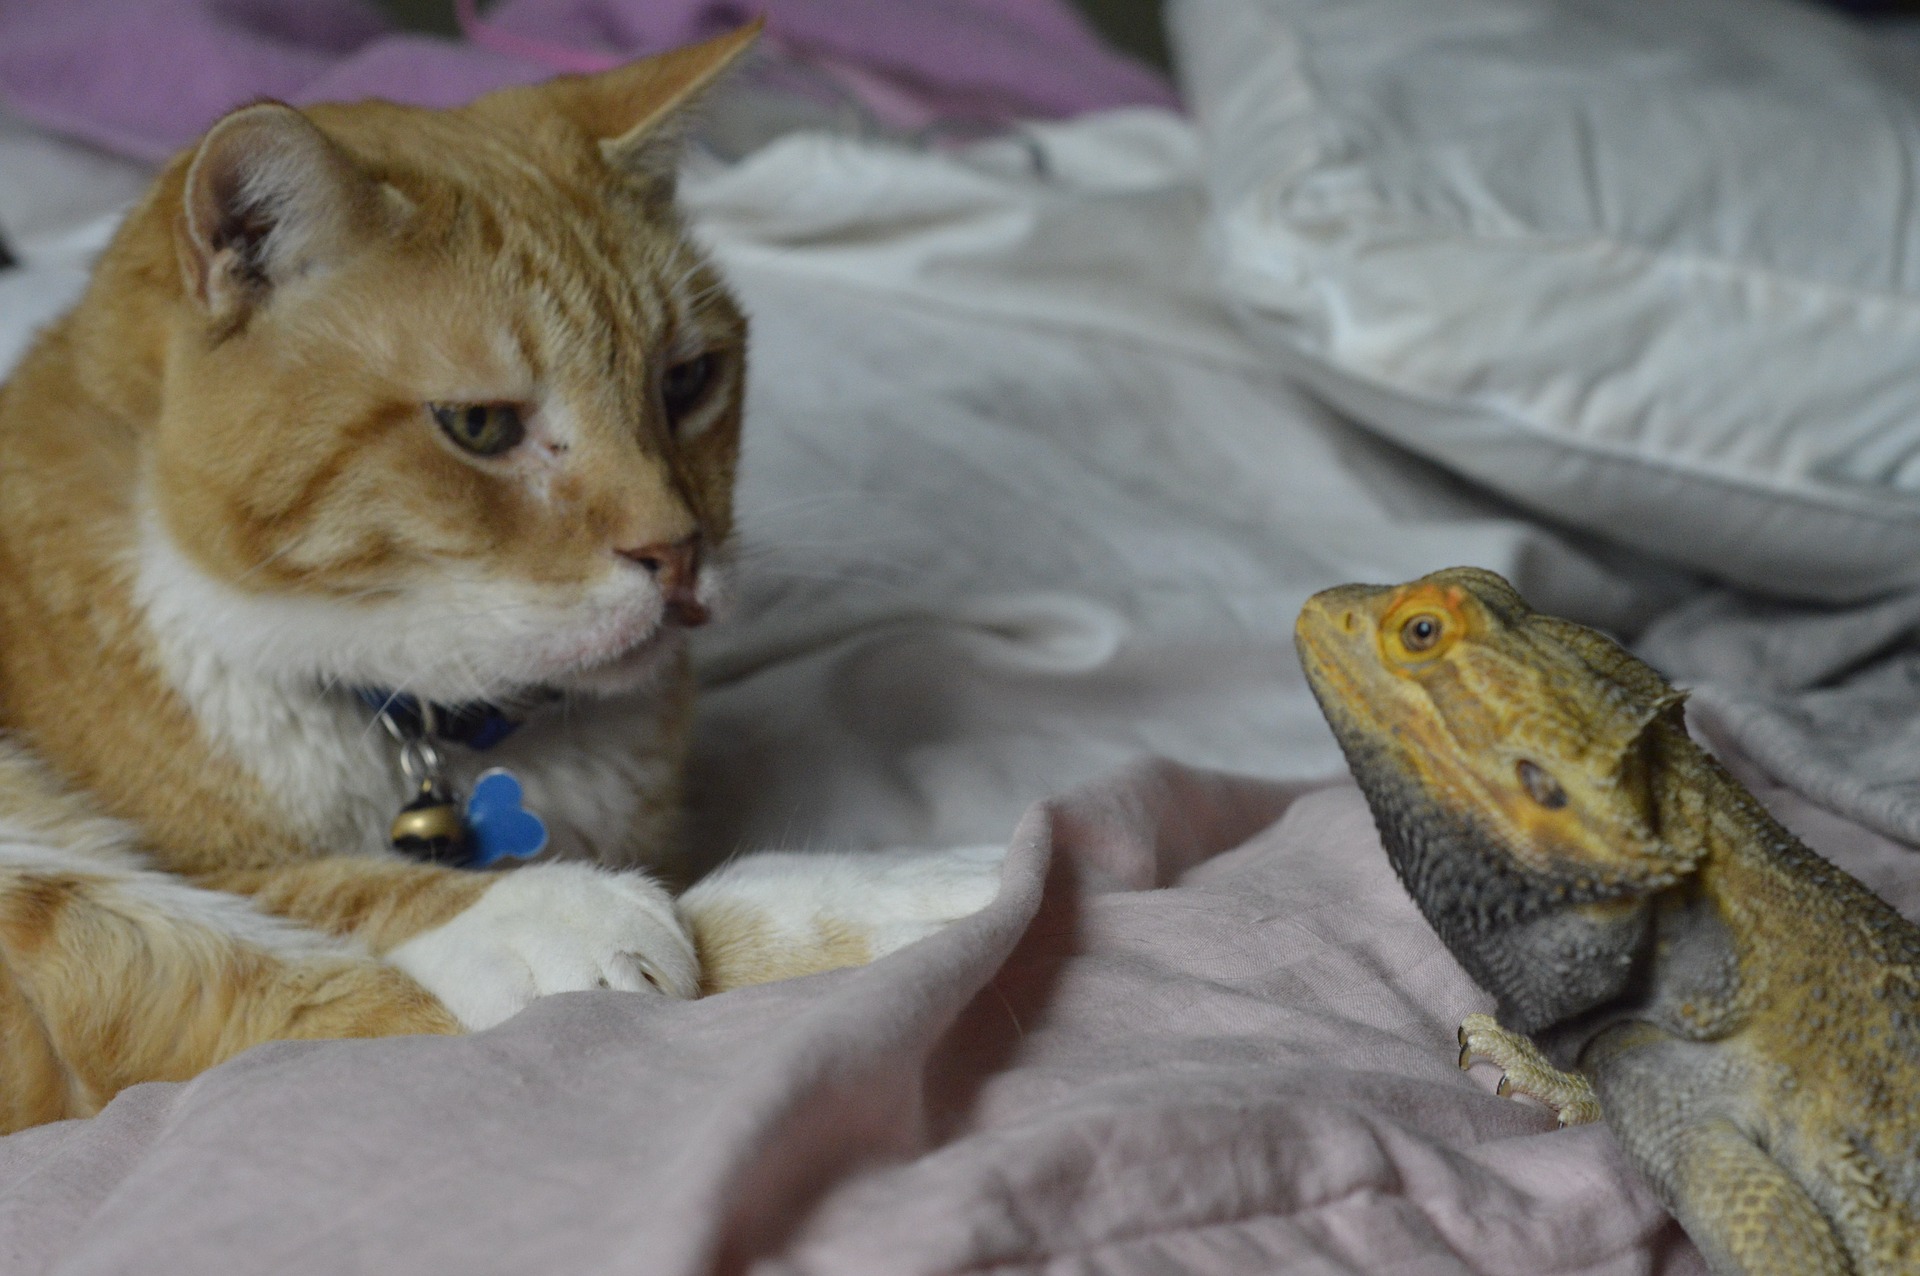 Cat and bearded dragon